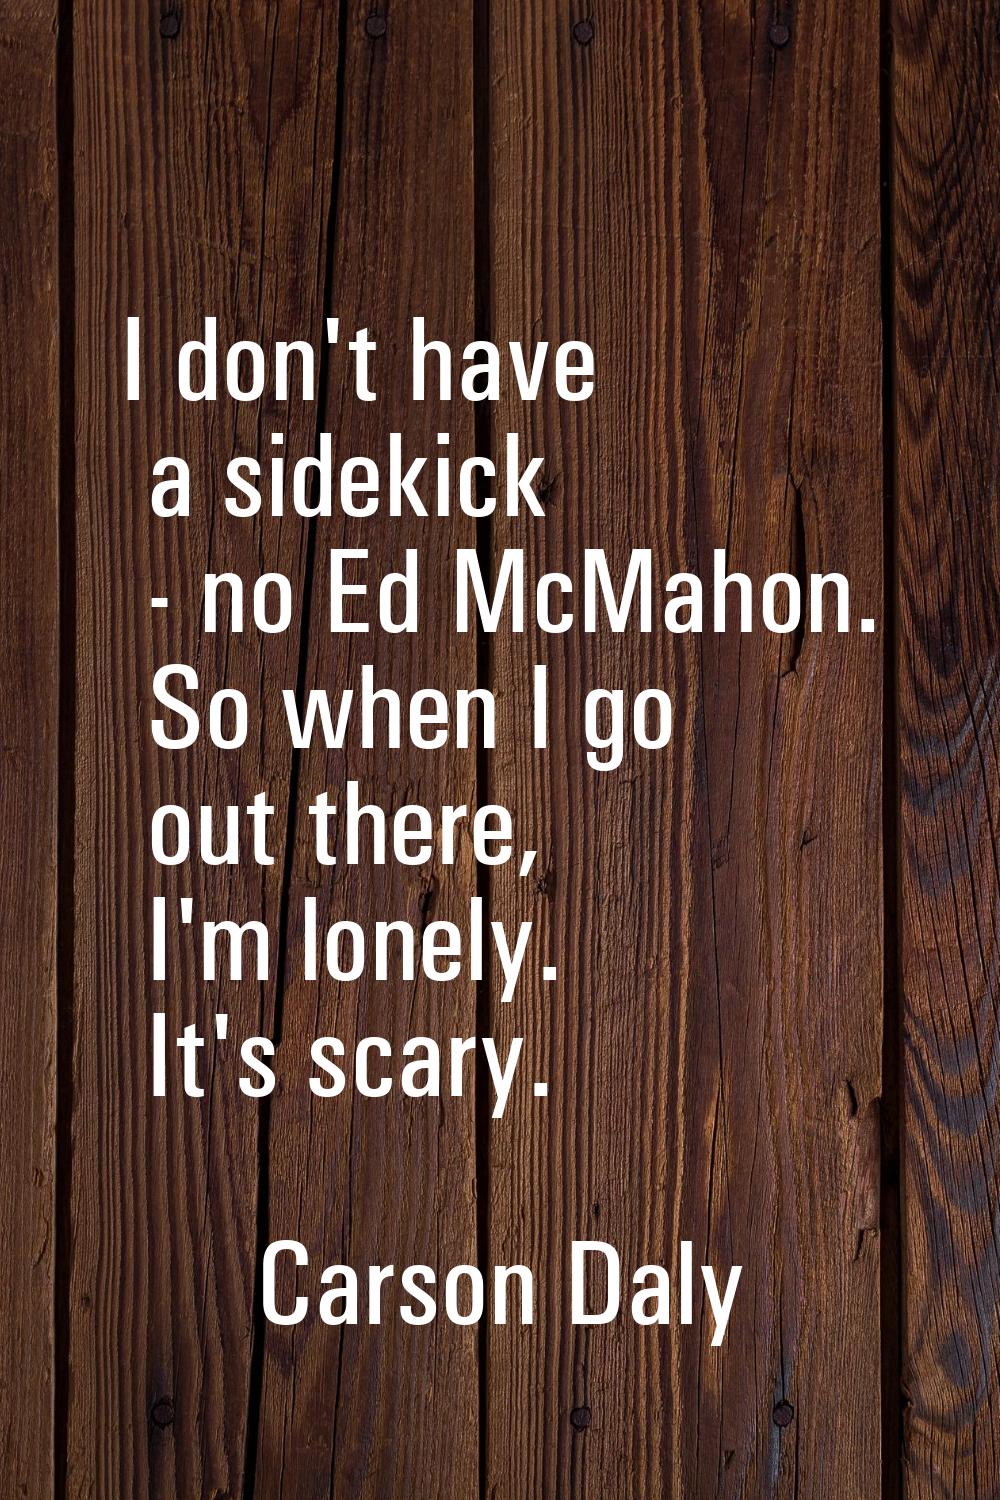 I don't have a sidekick - no Ed McMahon. So when I go out there, I'm lonely. It's scary.